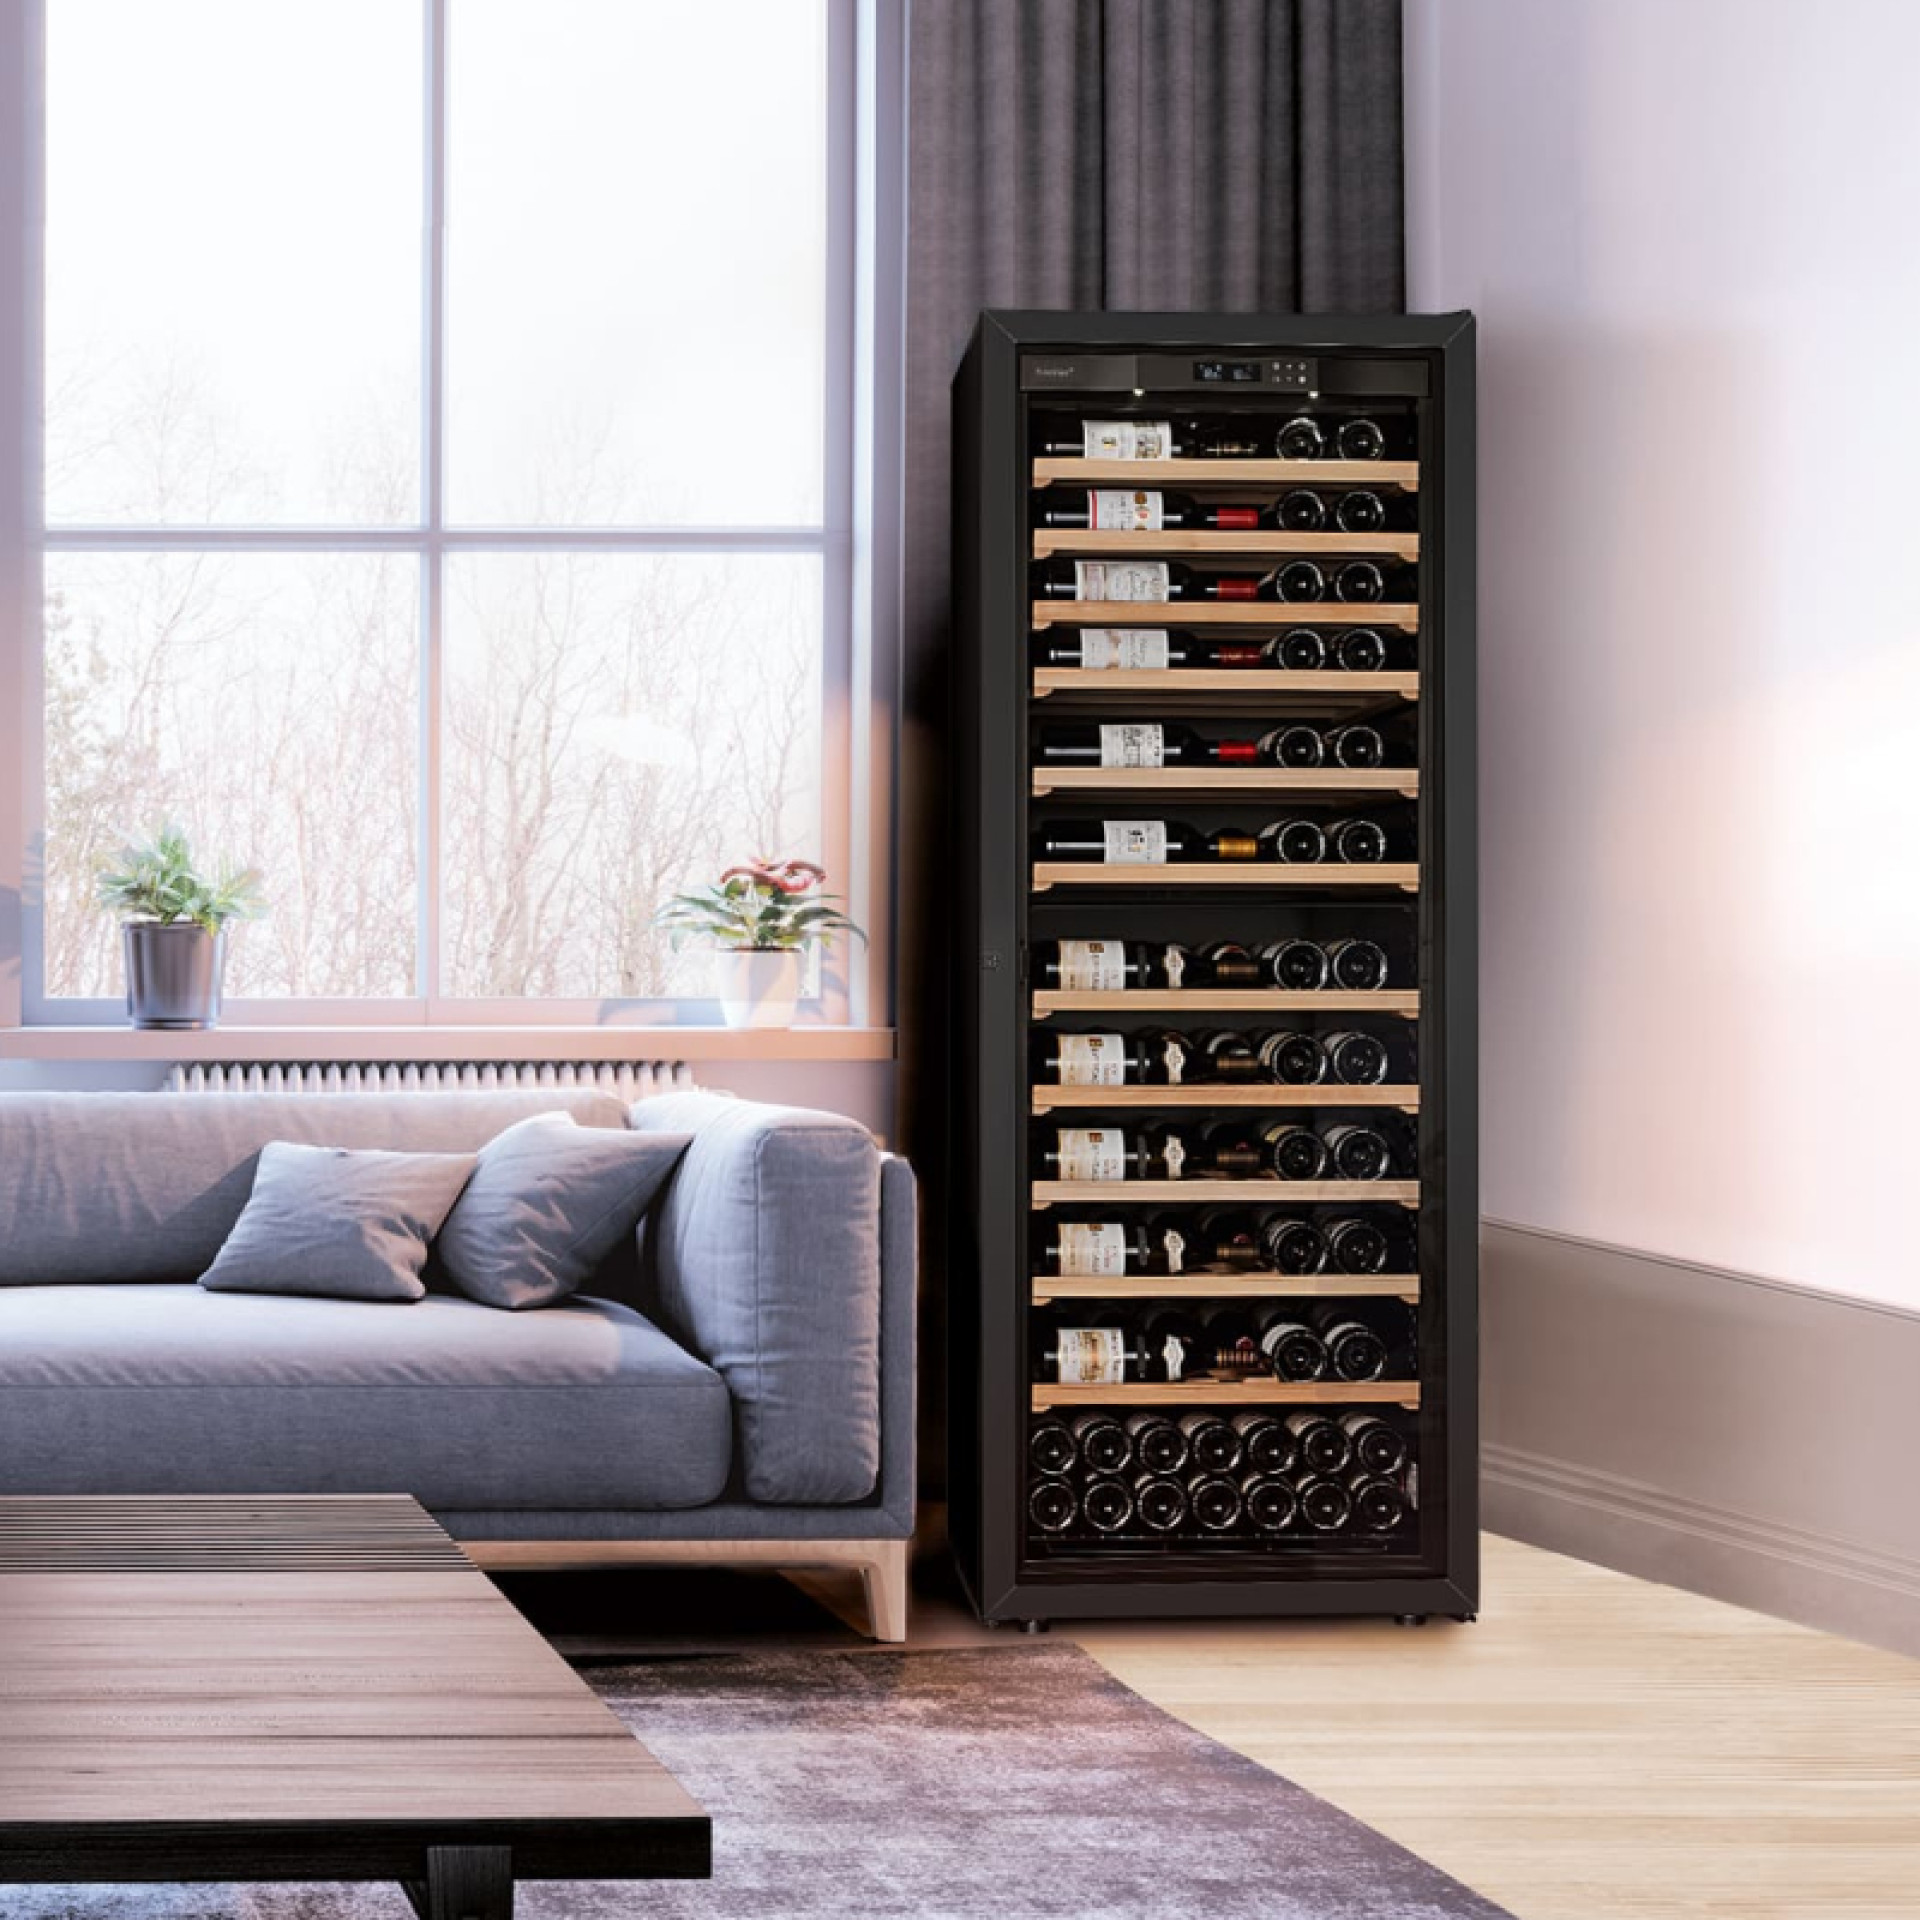 2-temperature, 3-temperature or multi-temperature wine coolers for serving wines